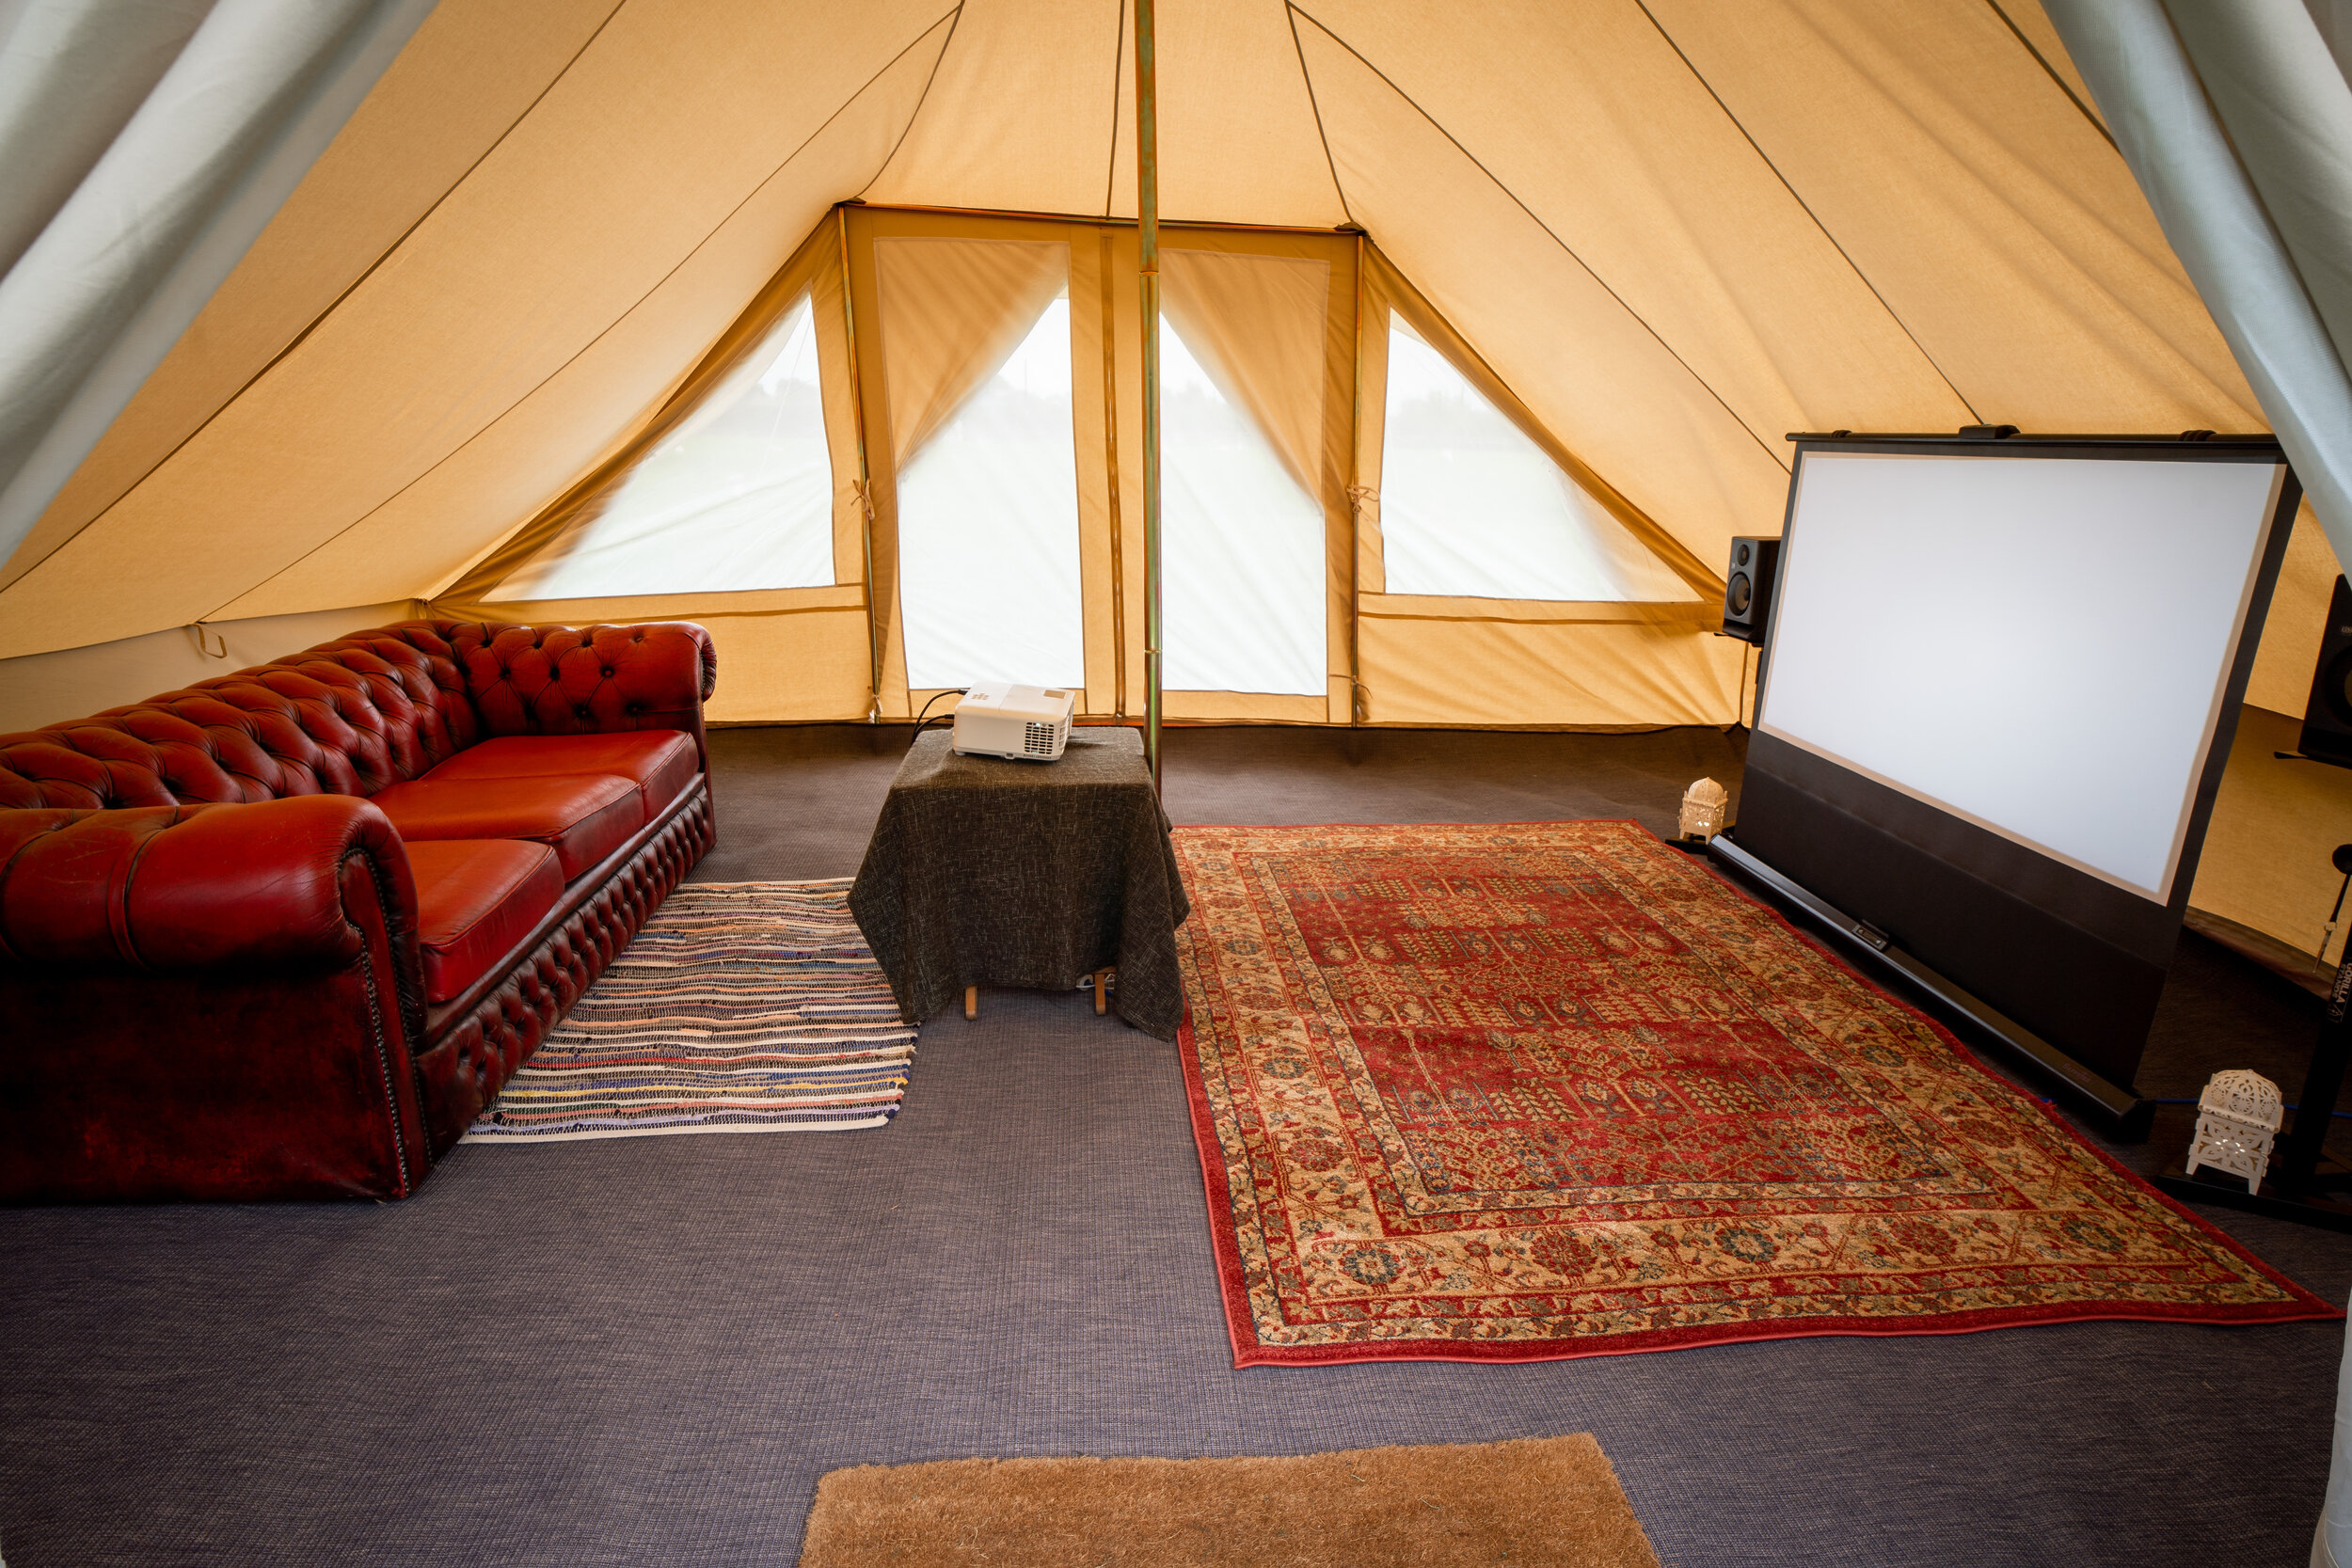 The touareg tent with Chesterfield sofa